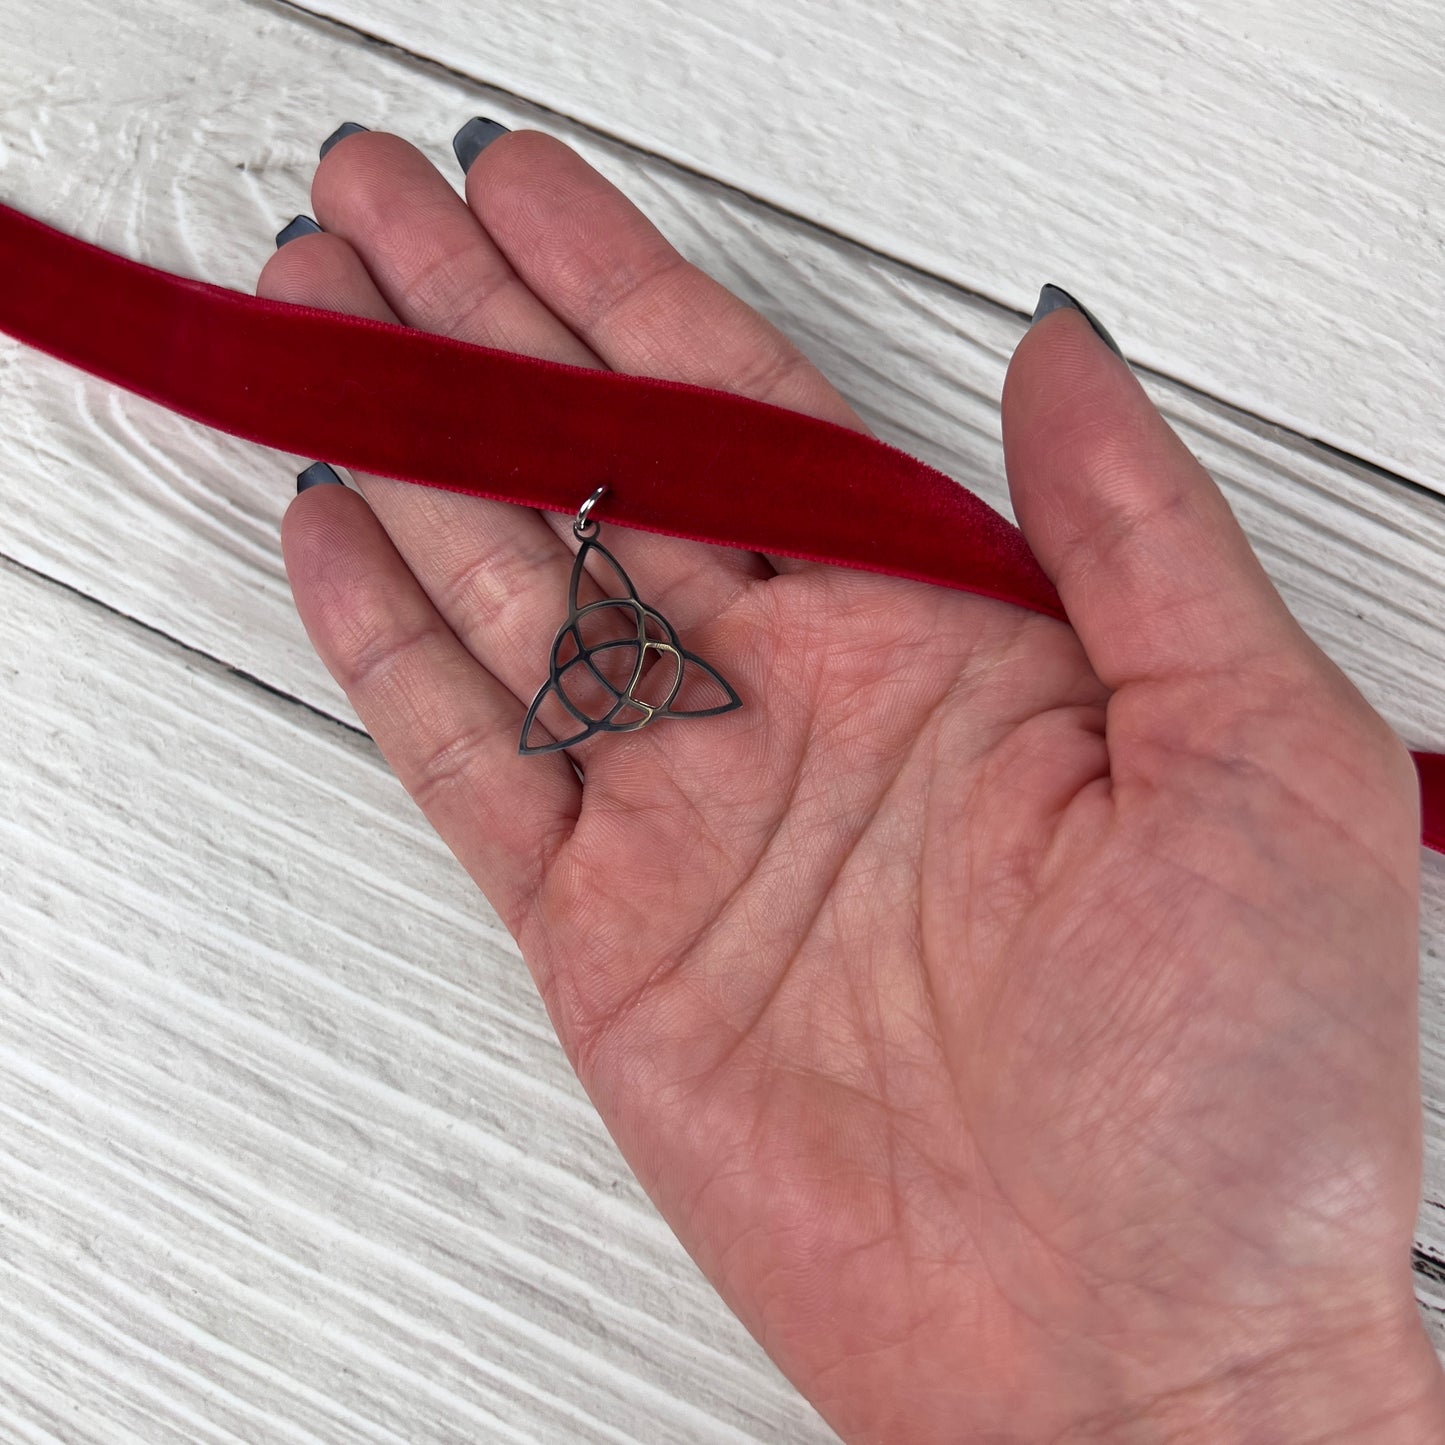 red velvet victorian gothic choker necklace for pagan witch triquetra celtic knot occult pendant